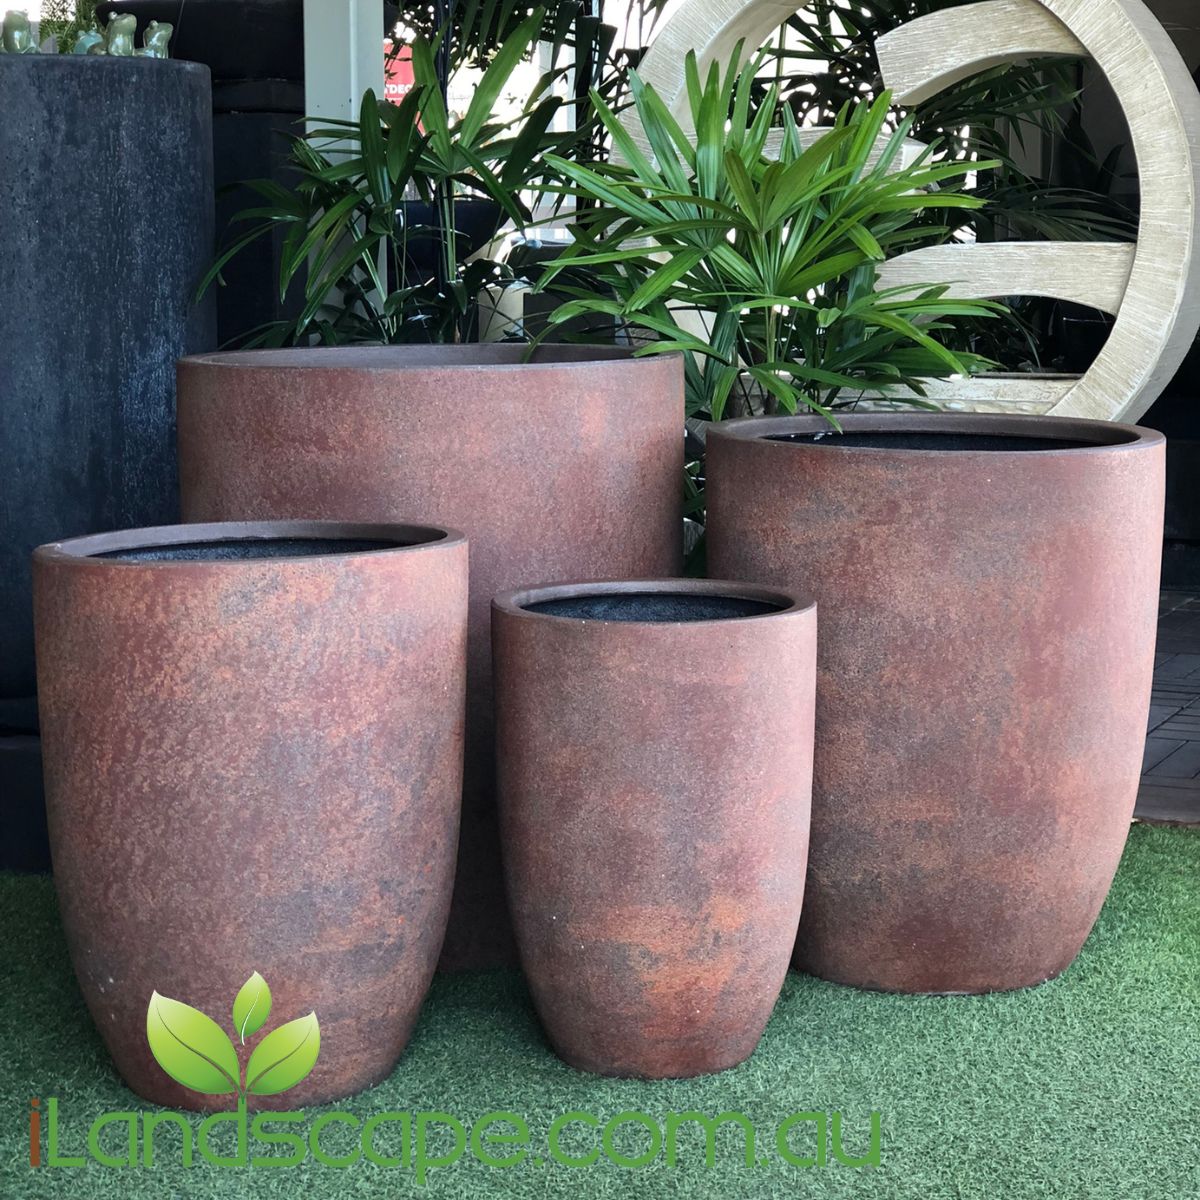 Chambers U Pot by Modstone is a designer range of strong, durable lightweight planters with a stylish terrazzo appearance. Modstone Pots are made using a similar production process to our  Urbanlite range, but also contain a coarse stone grit exterior layer which can be treated to produce a variety of attractive polished and rough finishes 